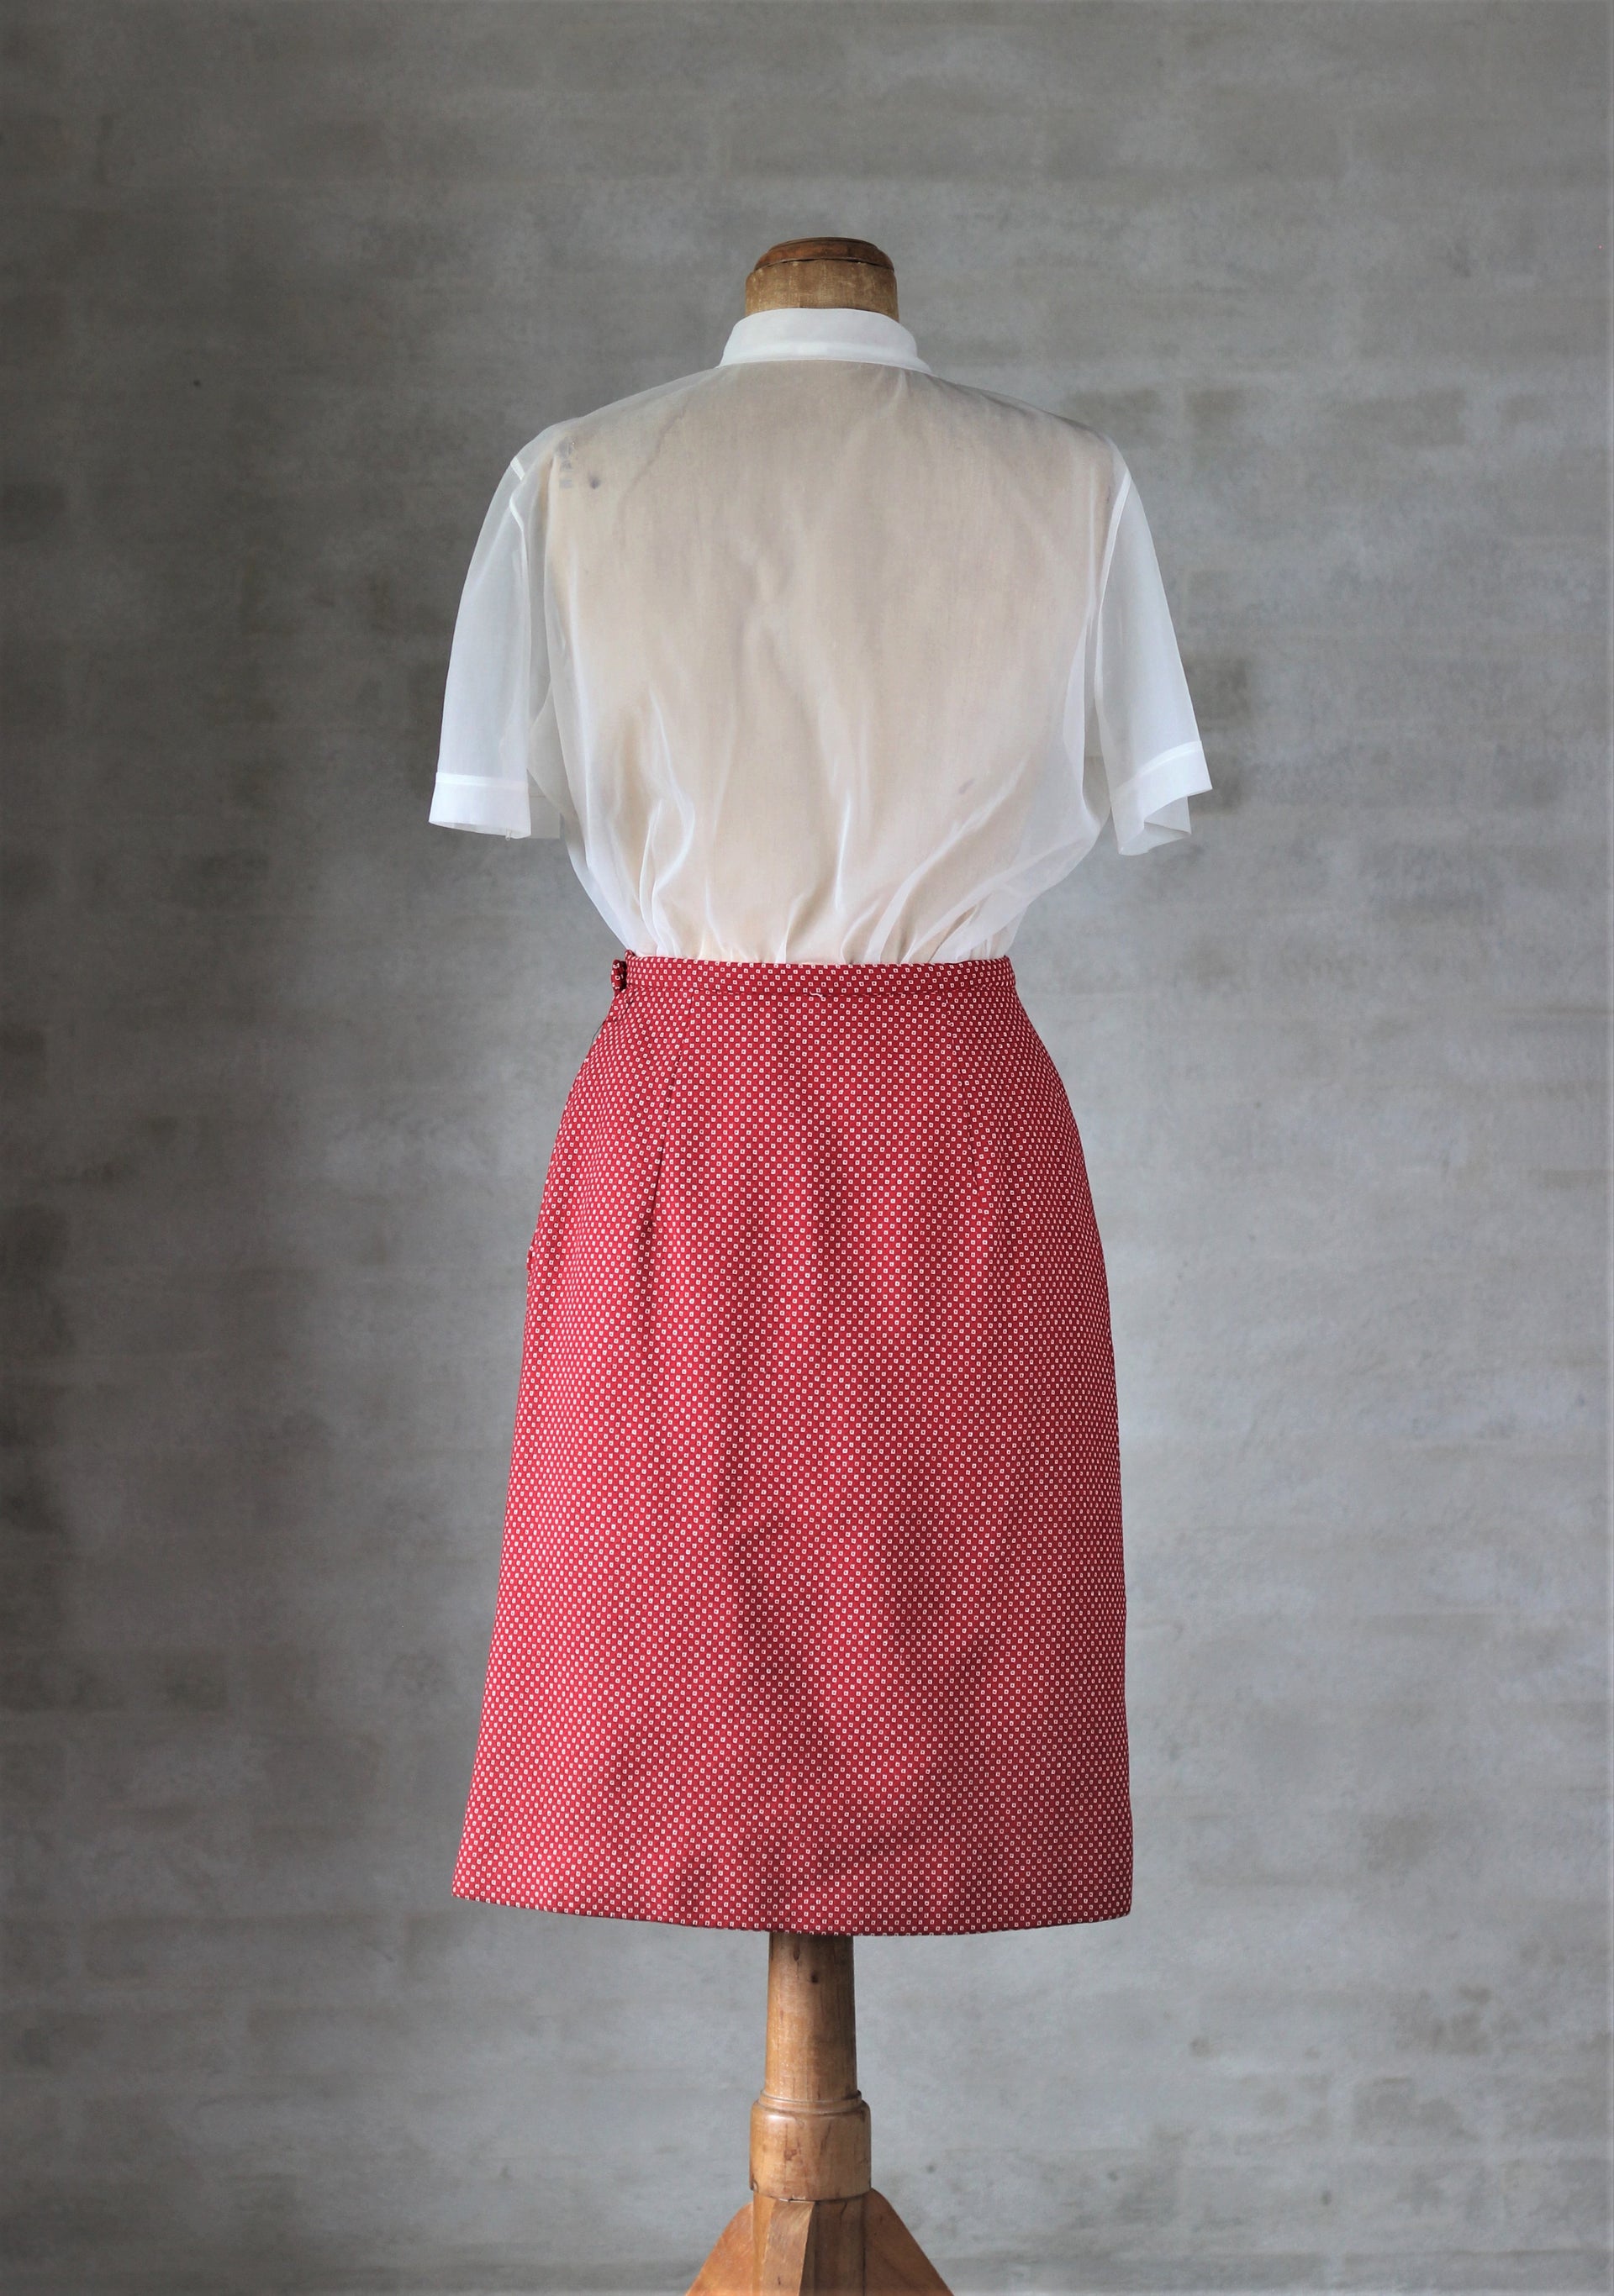 1960s/1970s Deadstock Italian Red Wool Skirt Suit with Belt//Size S/M